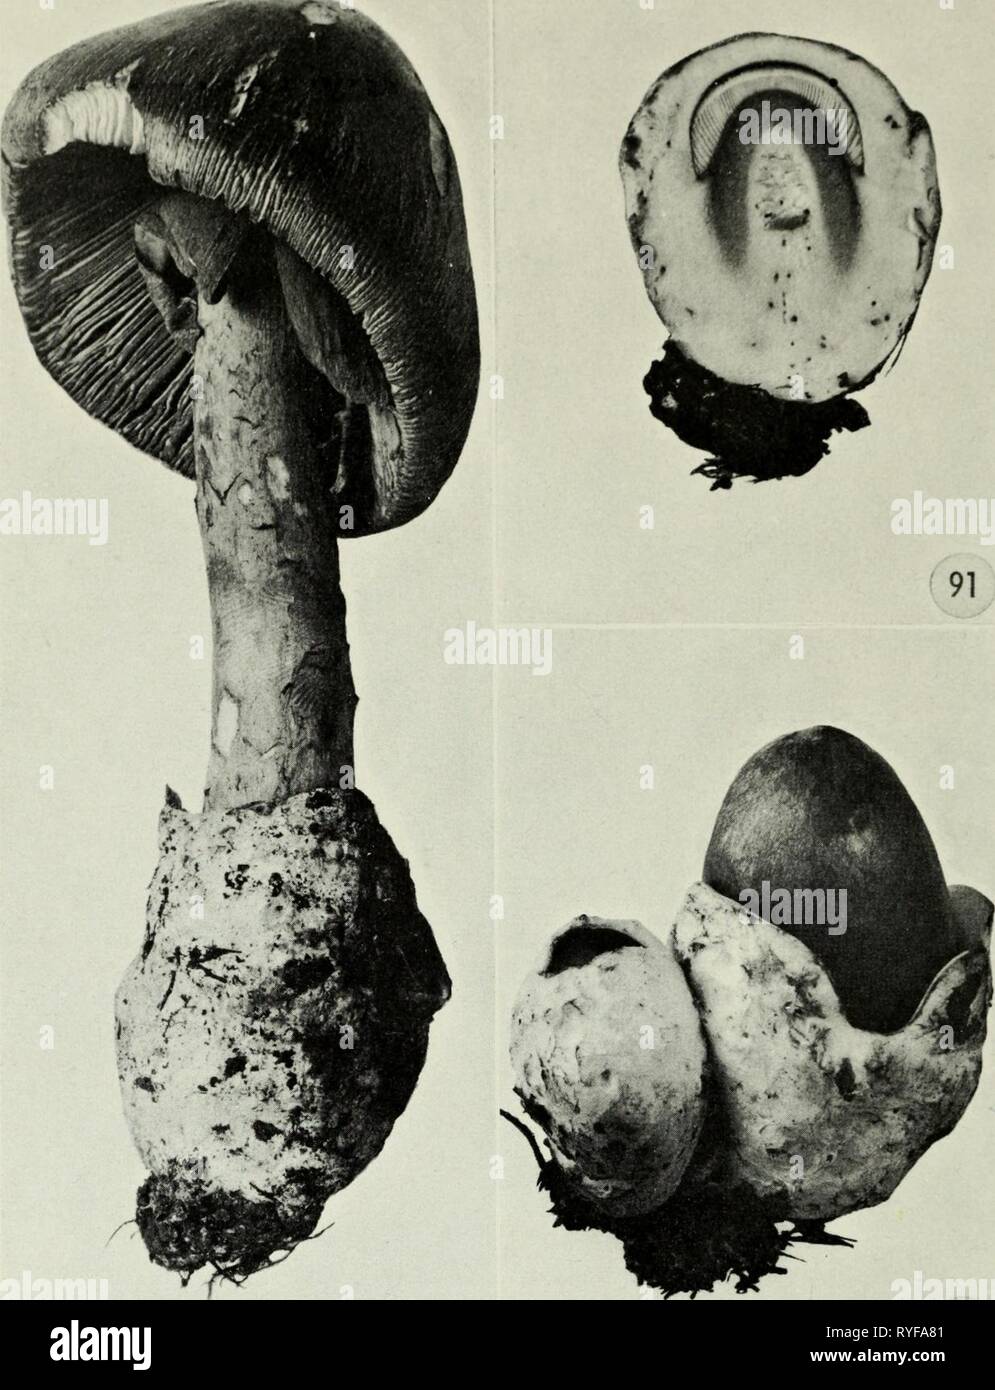 Edible and poisonous mushrooms of Canada  ediblepoisonousm00grov Year: 1979    I I 90 V 92 Figures 90-92, Amanita caesarea. 90, mature plant, note loose membranous volva; 91, section of young plant before volva has ruptured showing outline of young fruiting body within the volva; 92, young plants showing ruptured volva with young fruiting body emerging. 93. Russula densifolia. 95. R. emetica. 97. R.jallax. 99. R. joetens. 101. R. lutea. Figures 93-102 94. R. densifolia. 96. R. emetica. 98. R.flava. 100. R.fragilis. 102. R. nigricans. 48 Stock Photo